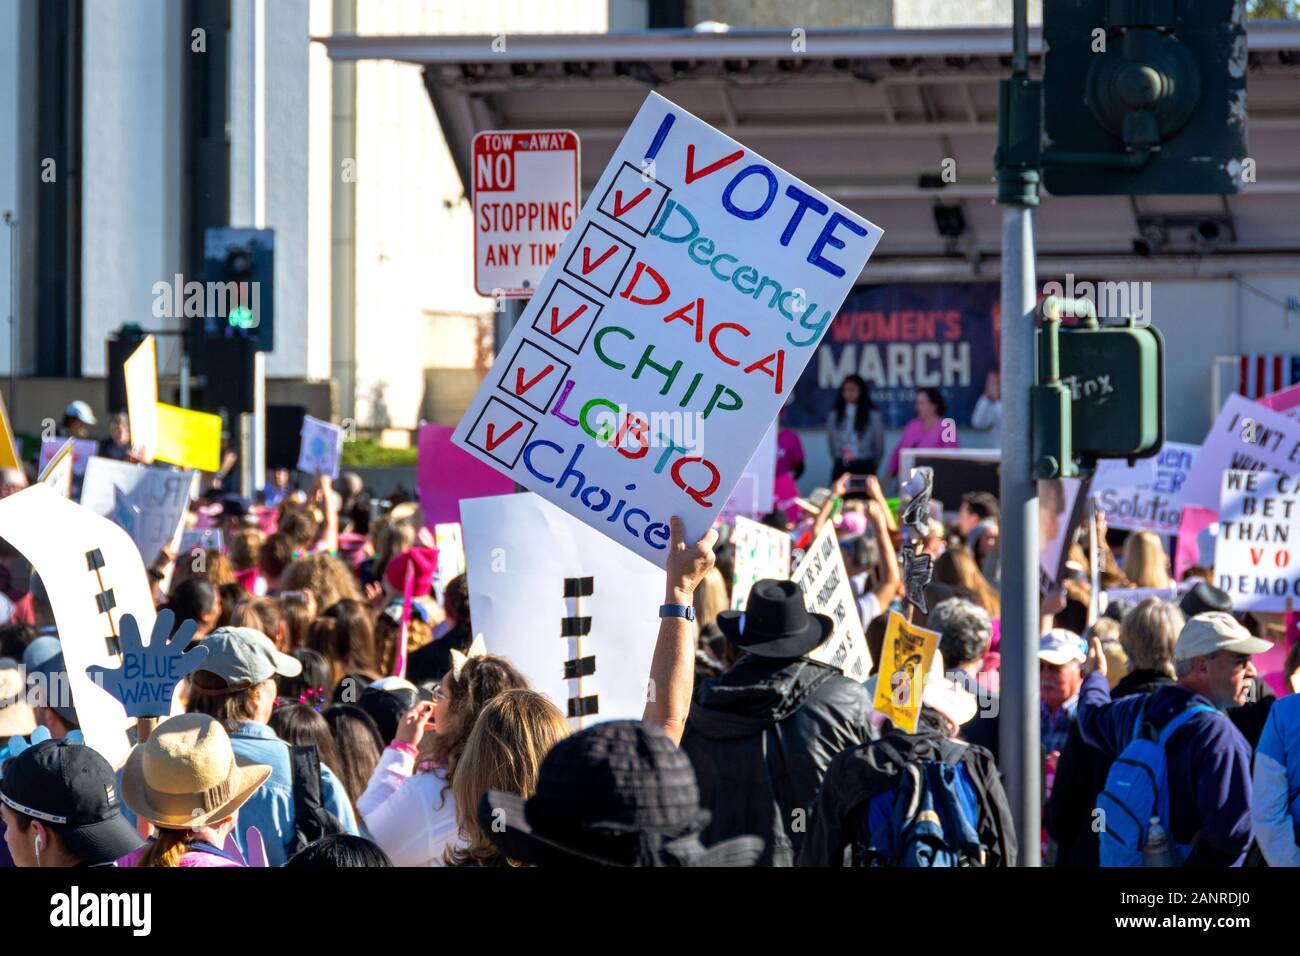 A crowd of activists at the 2020 Orange County Women’s March hold signs with pro-choice, LGBTQ, Blue Wave and other progressive messages on them. Stock Photo